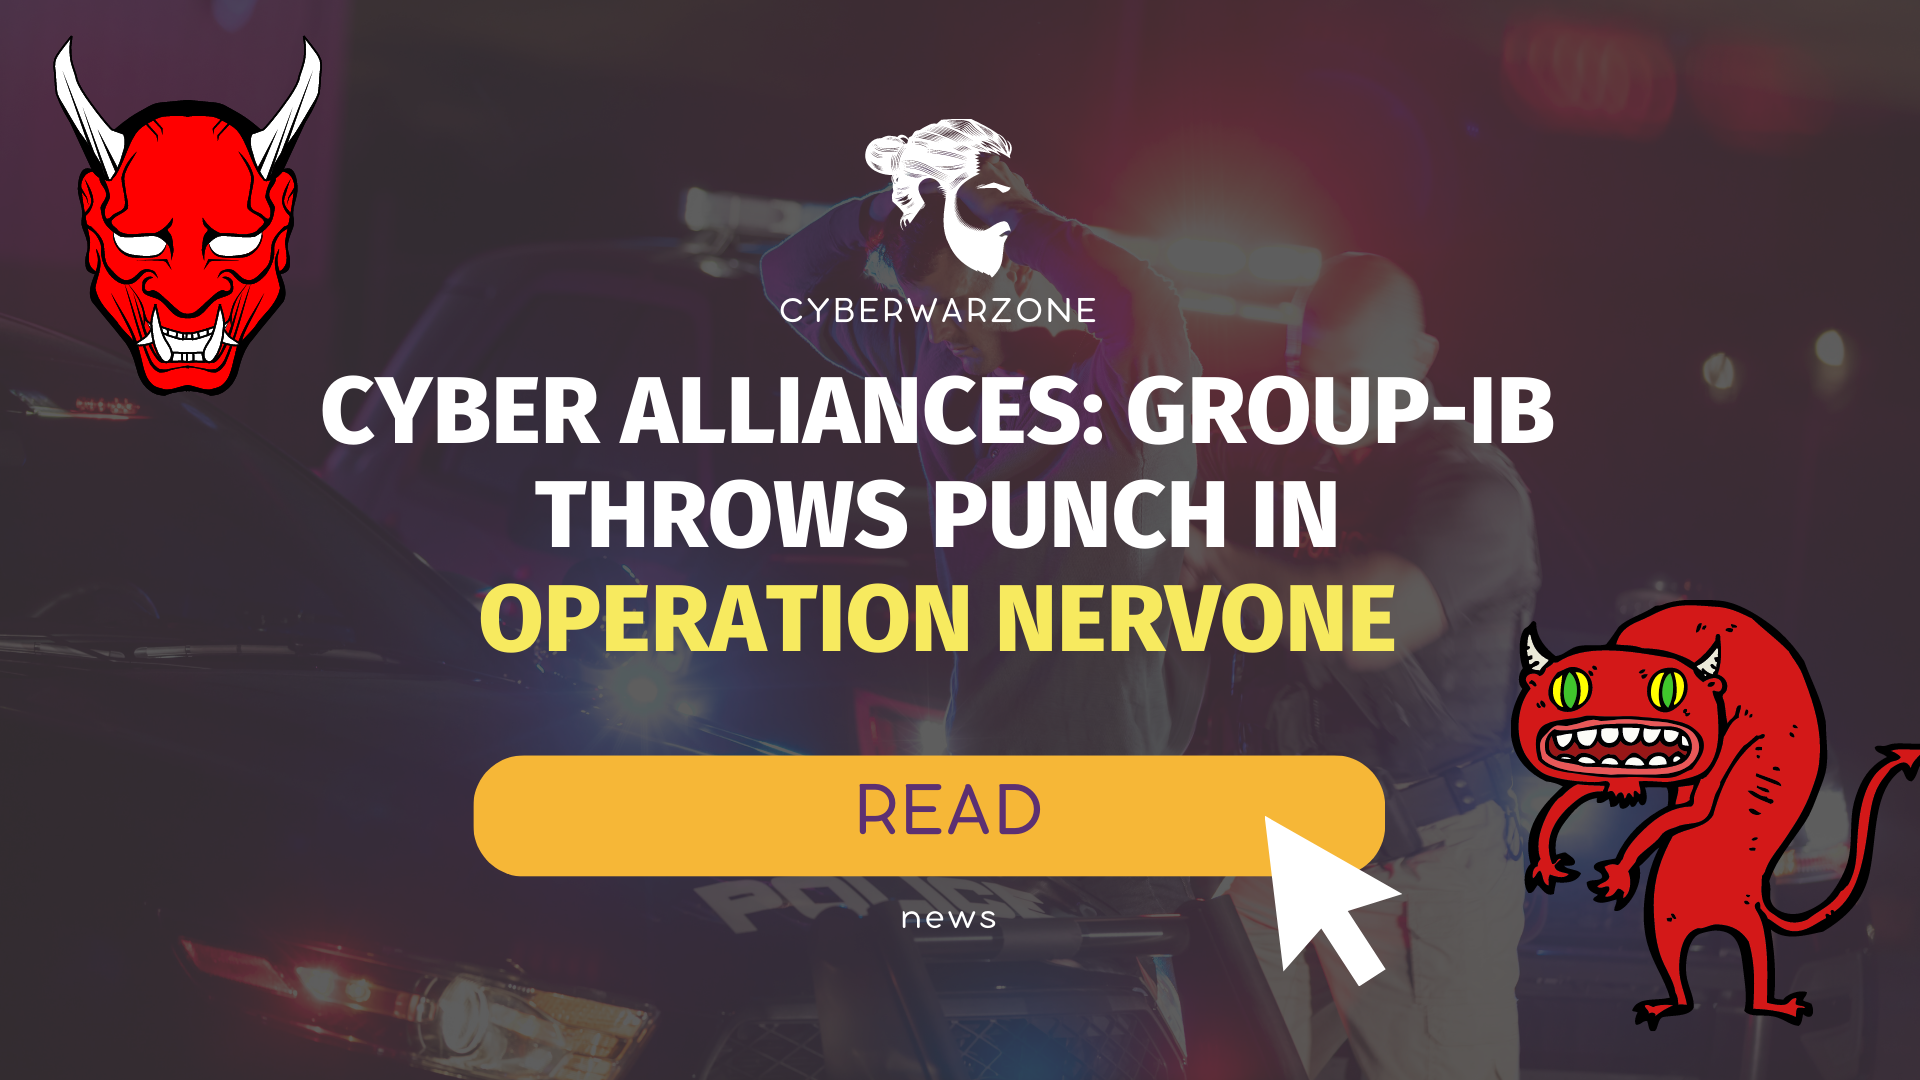 Cyber Alliances: Group-IB Throws Punch in Operation Nervone